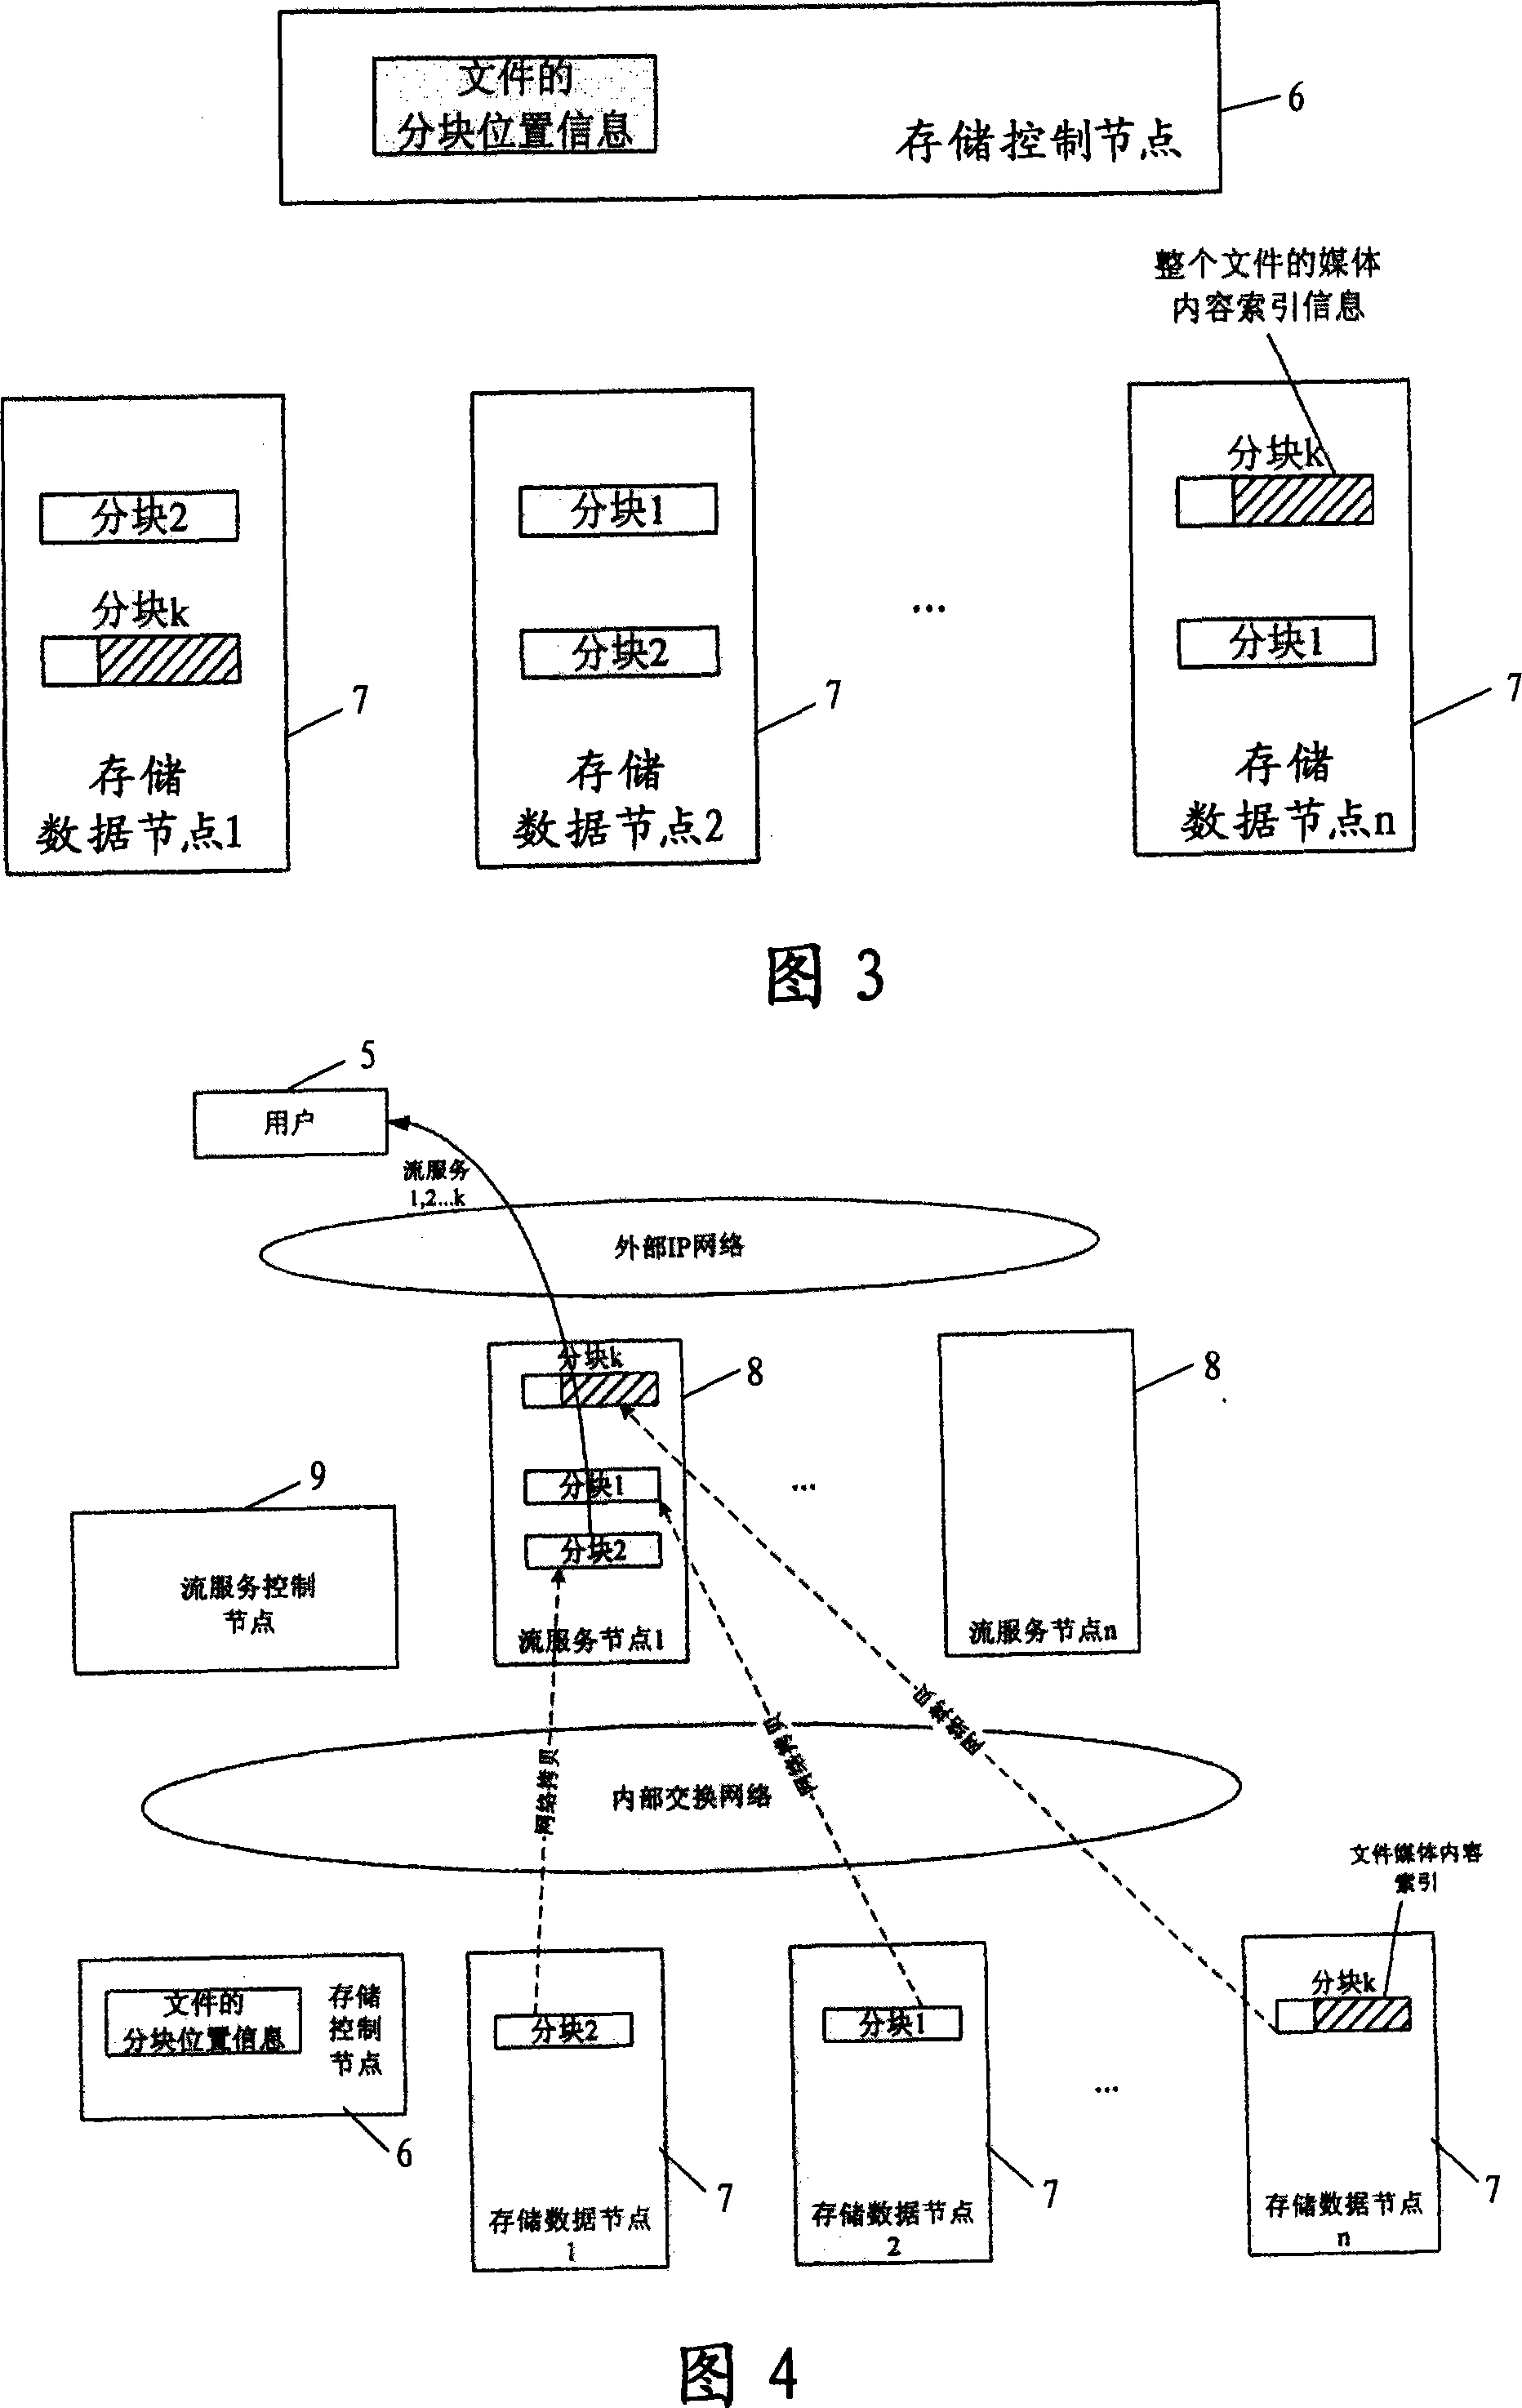 Slice storage and streaming service method for stream media system and multimedia files